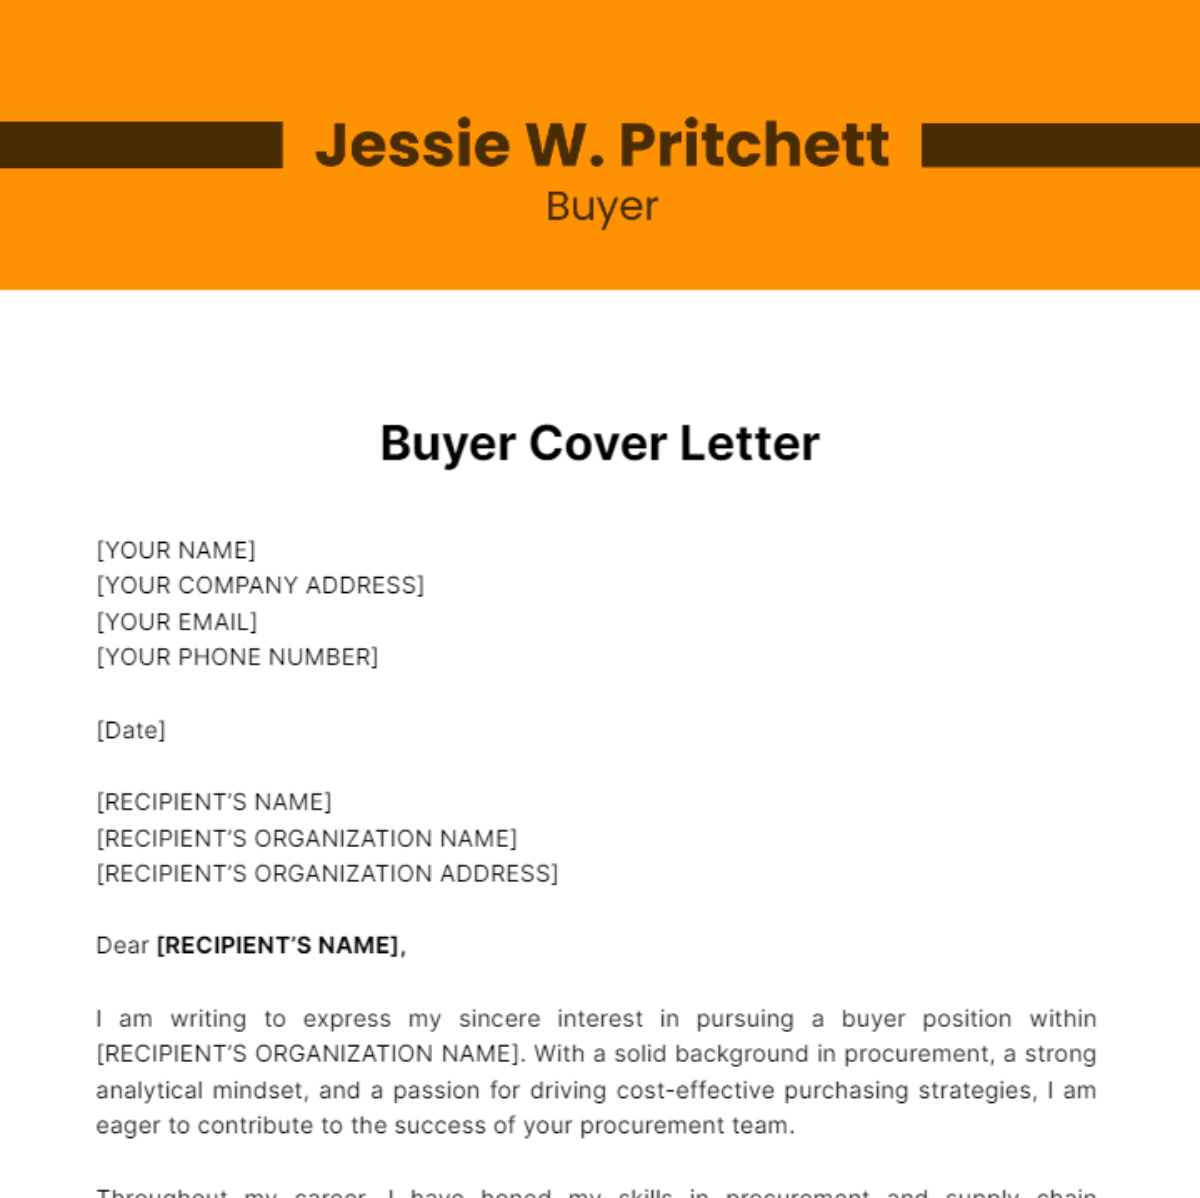 Buyer Cover Letter Template